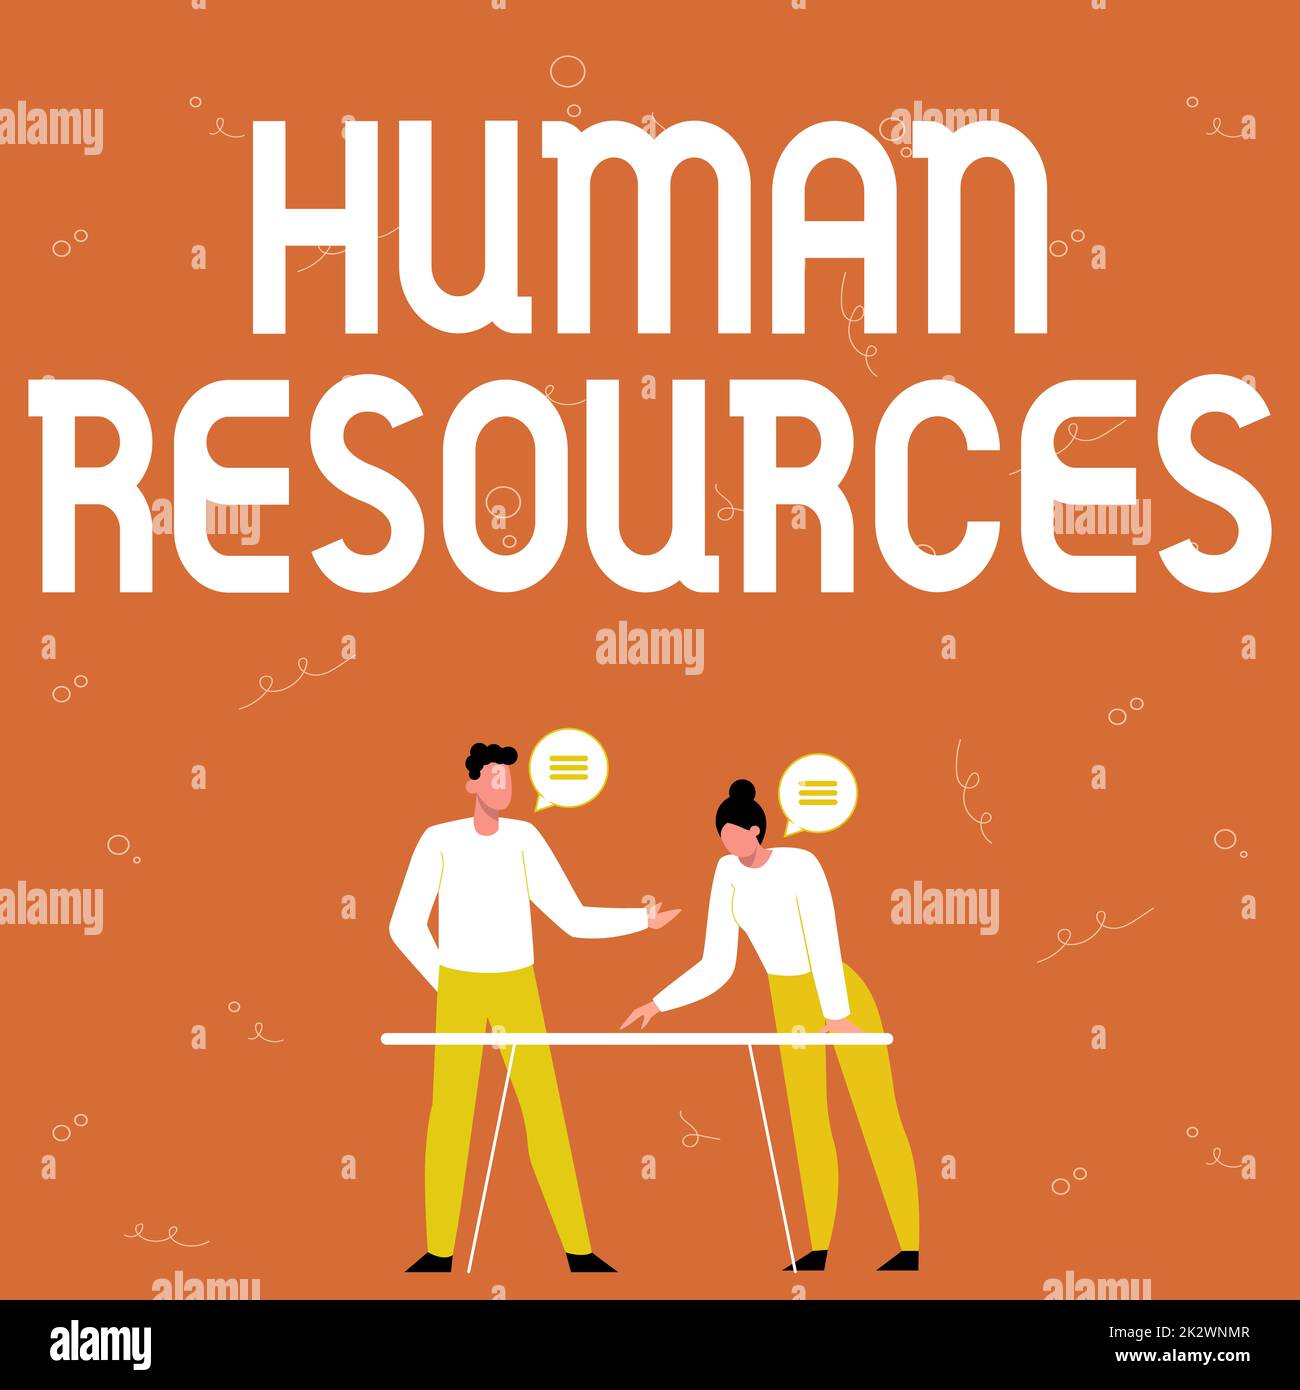 Sign displaying Human Resources. Business overview The showing who make up the workforce of an organization Partners Sharing New Ideas For Skill Improvement Work Strategies. Stock Photo